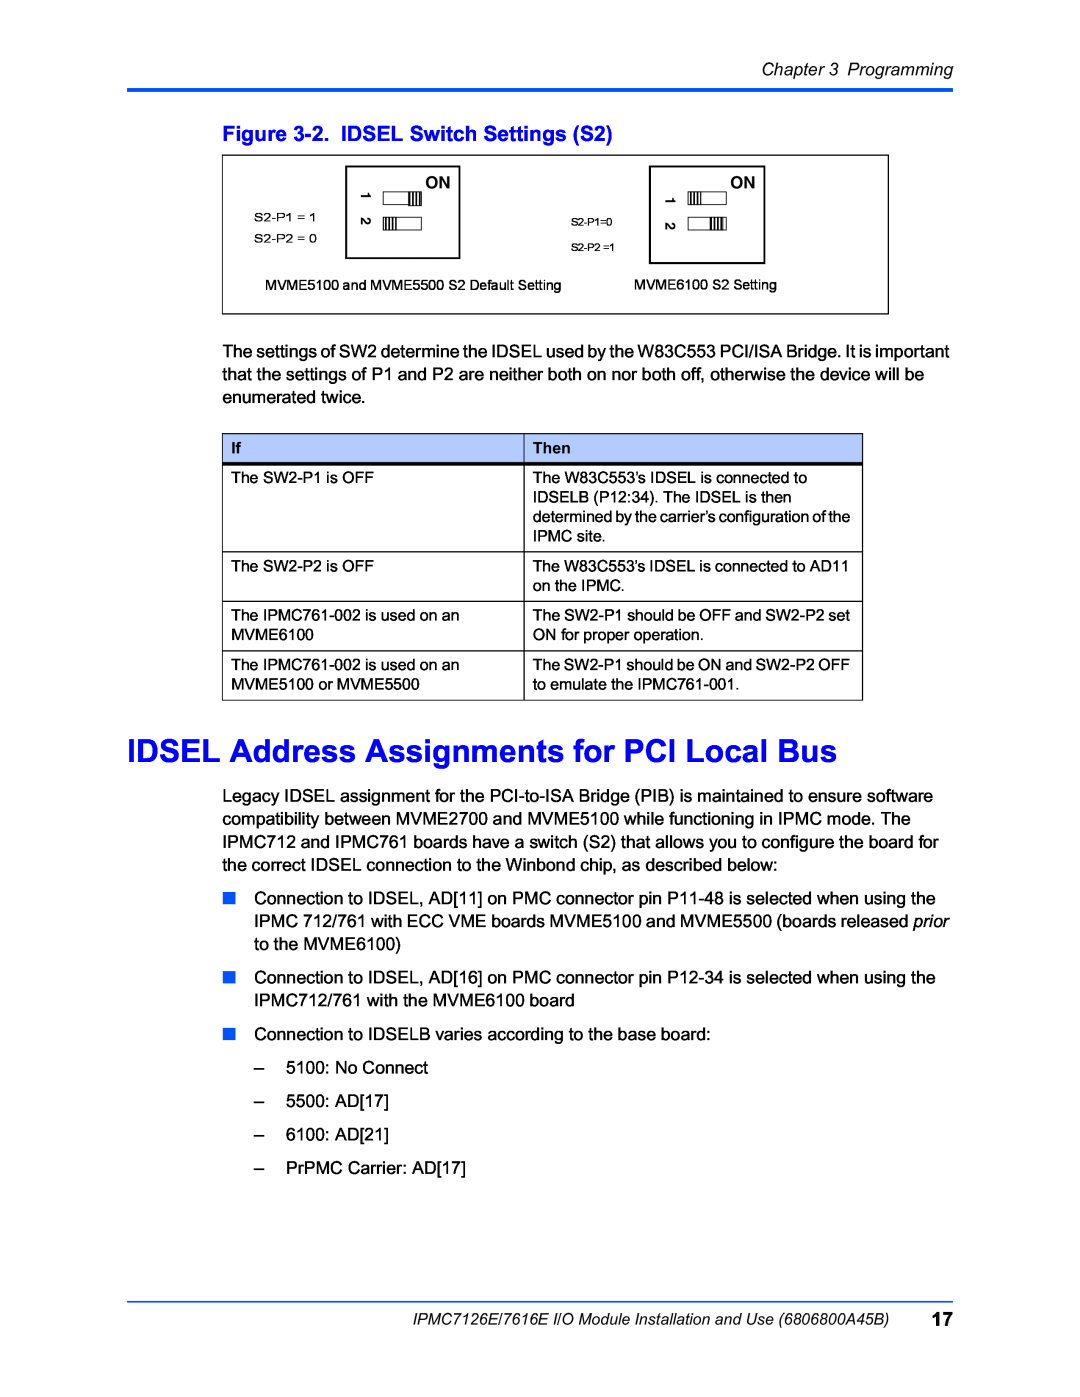 Emerson IPMC7126E, IPMC7616E manual IDSEL Address Assignments for PCI Local Bus, 2. IDSEL Switch Settings S2, Programming 